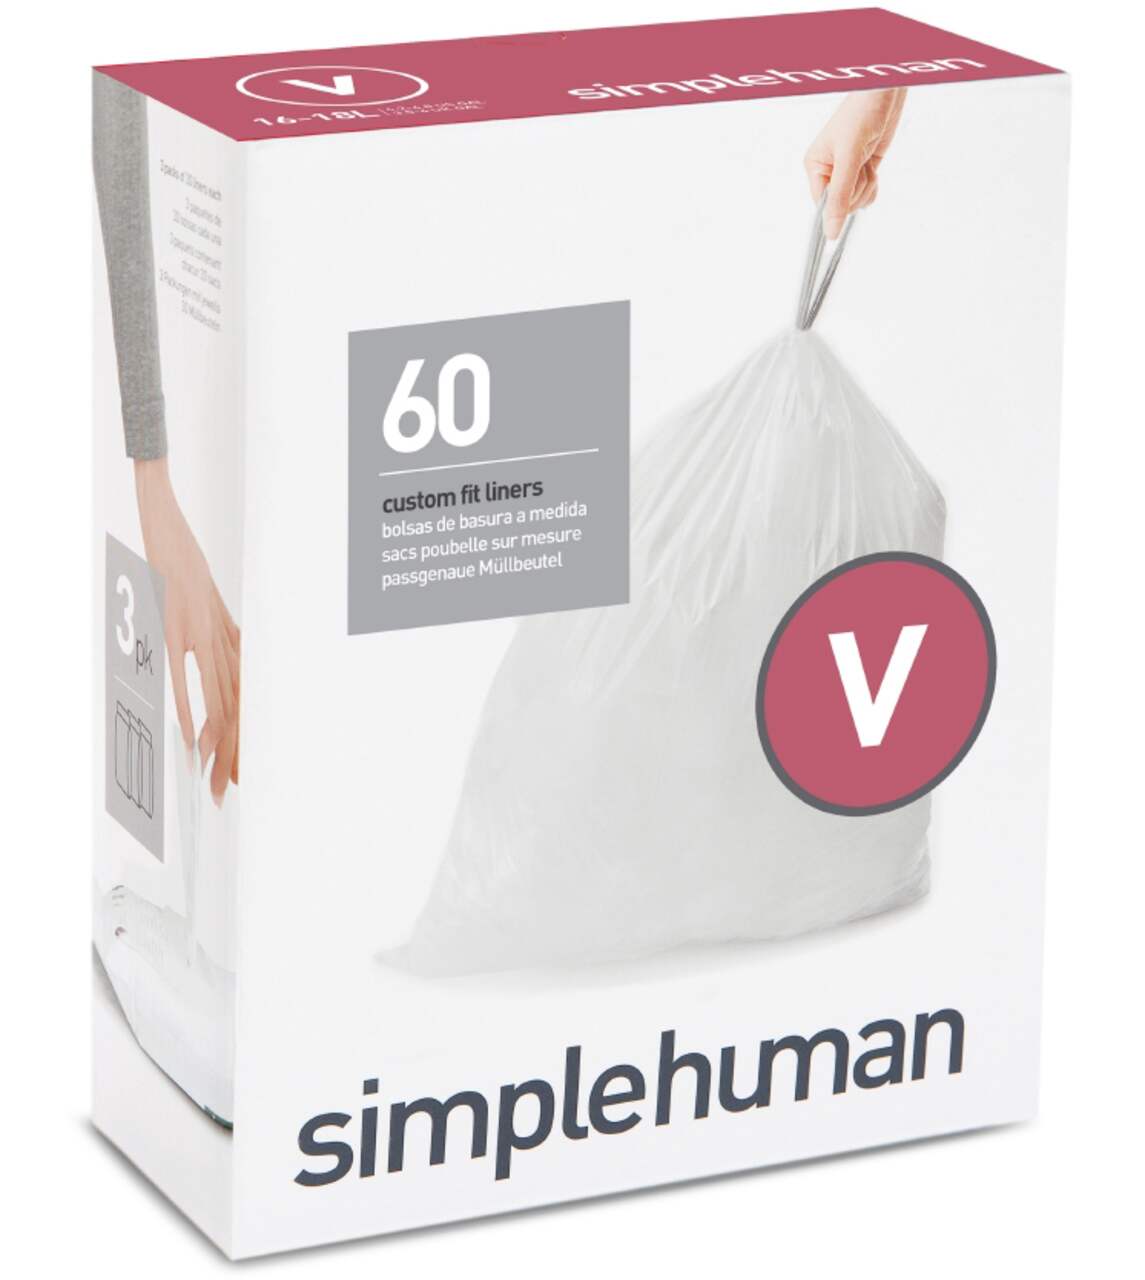 https://media-www.canadiantire.ca/product/living/cleaning/refuse-bags/1426198/simplehuman-code-v-liner-60-pack-ad15d83c-20dd-4f88-ade5-4d2de3b9fa9e.png?imdensity=1&imwidth=640&impolicy=mZoom